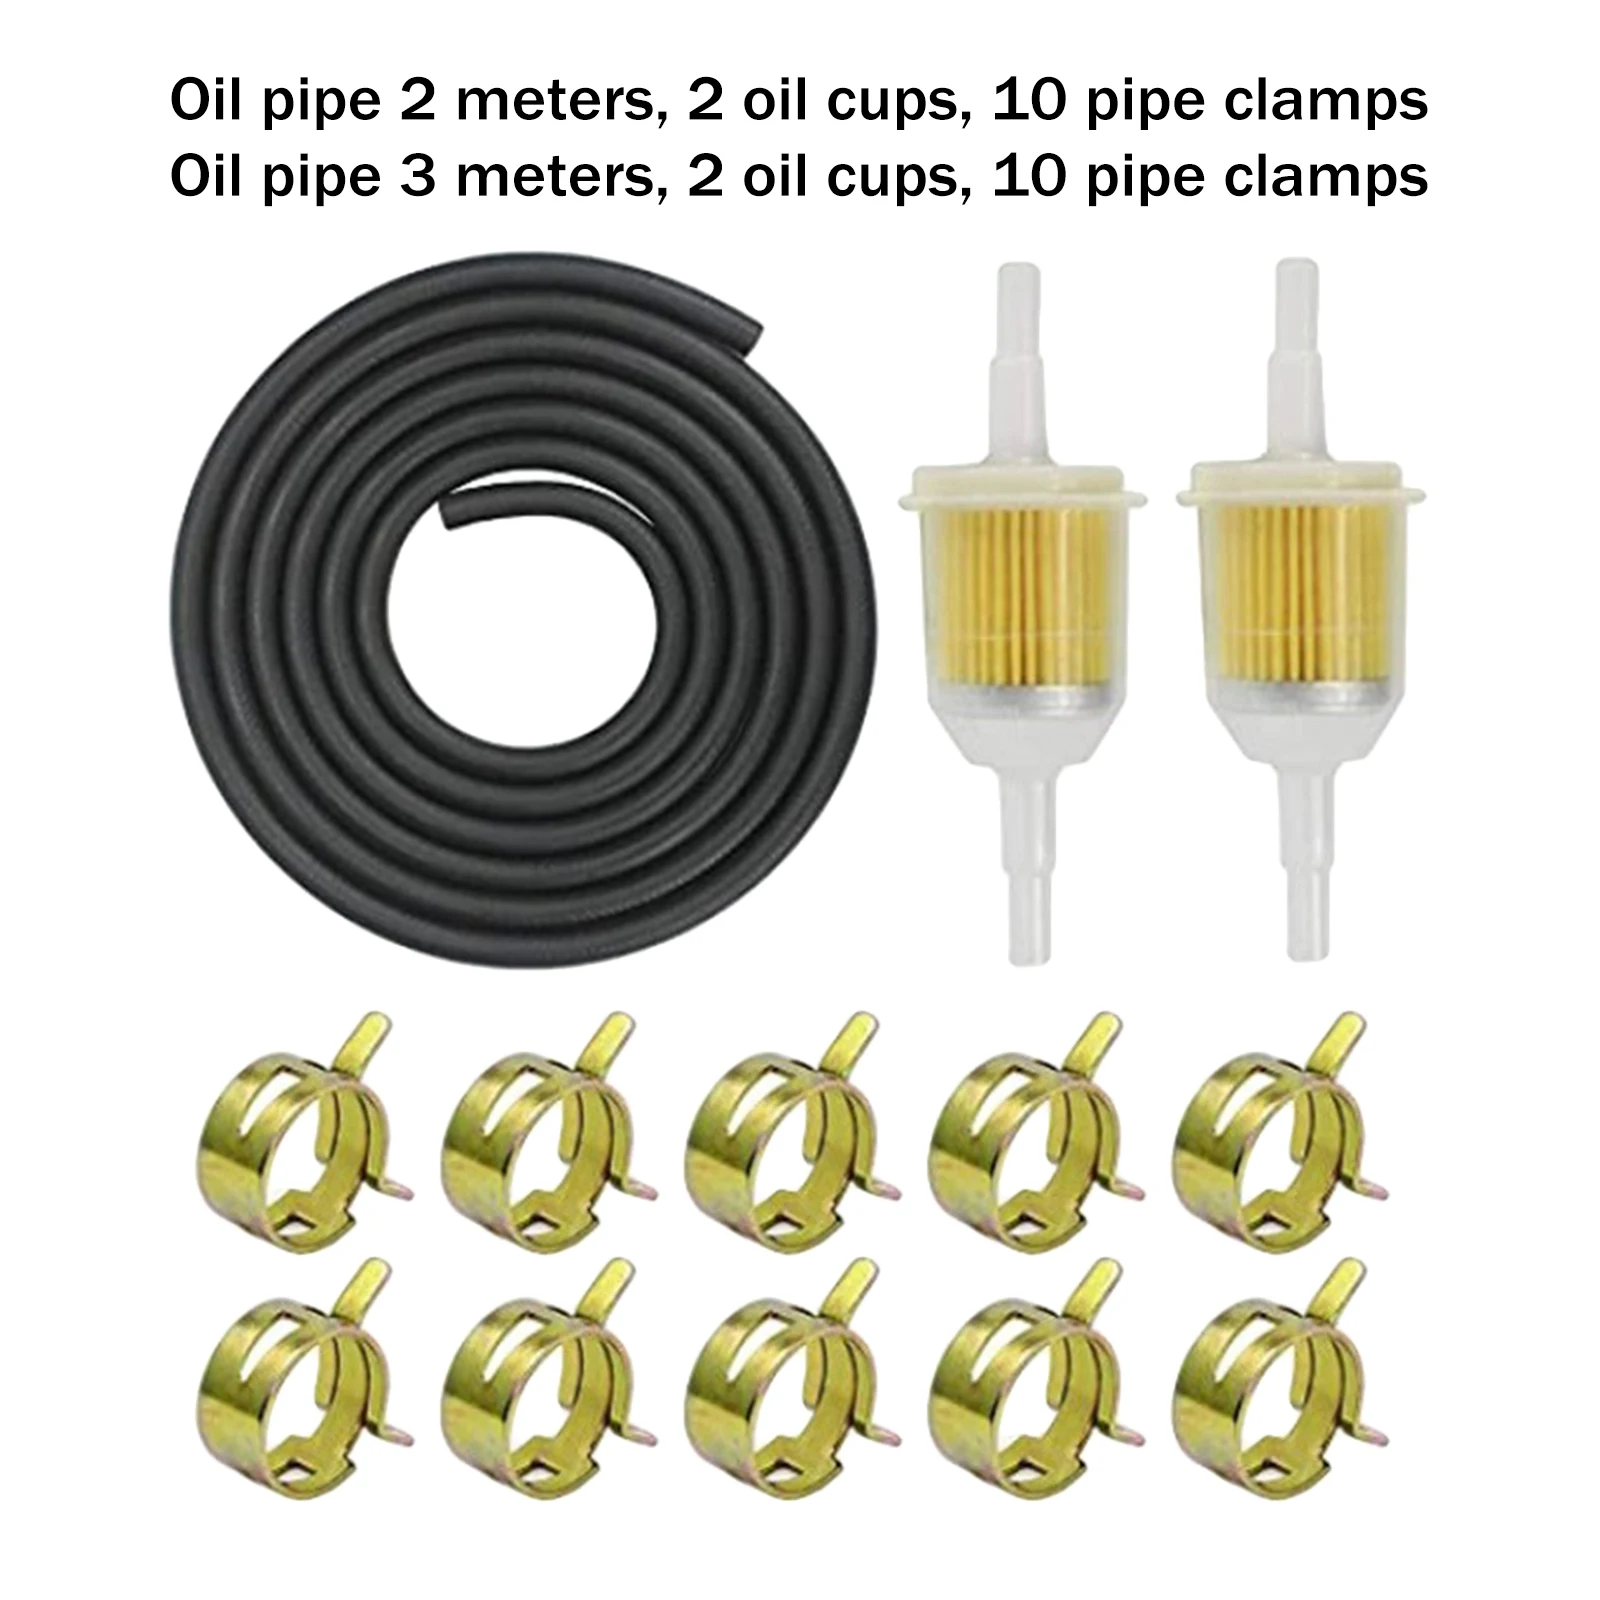 Fuel Line Hose Set 2x 8mm Oil Filters 10pc Hose Clamps for Lawn Mowers Motorcycles Weight Machines Parts